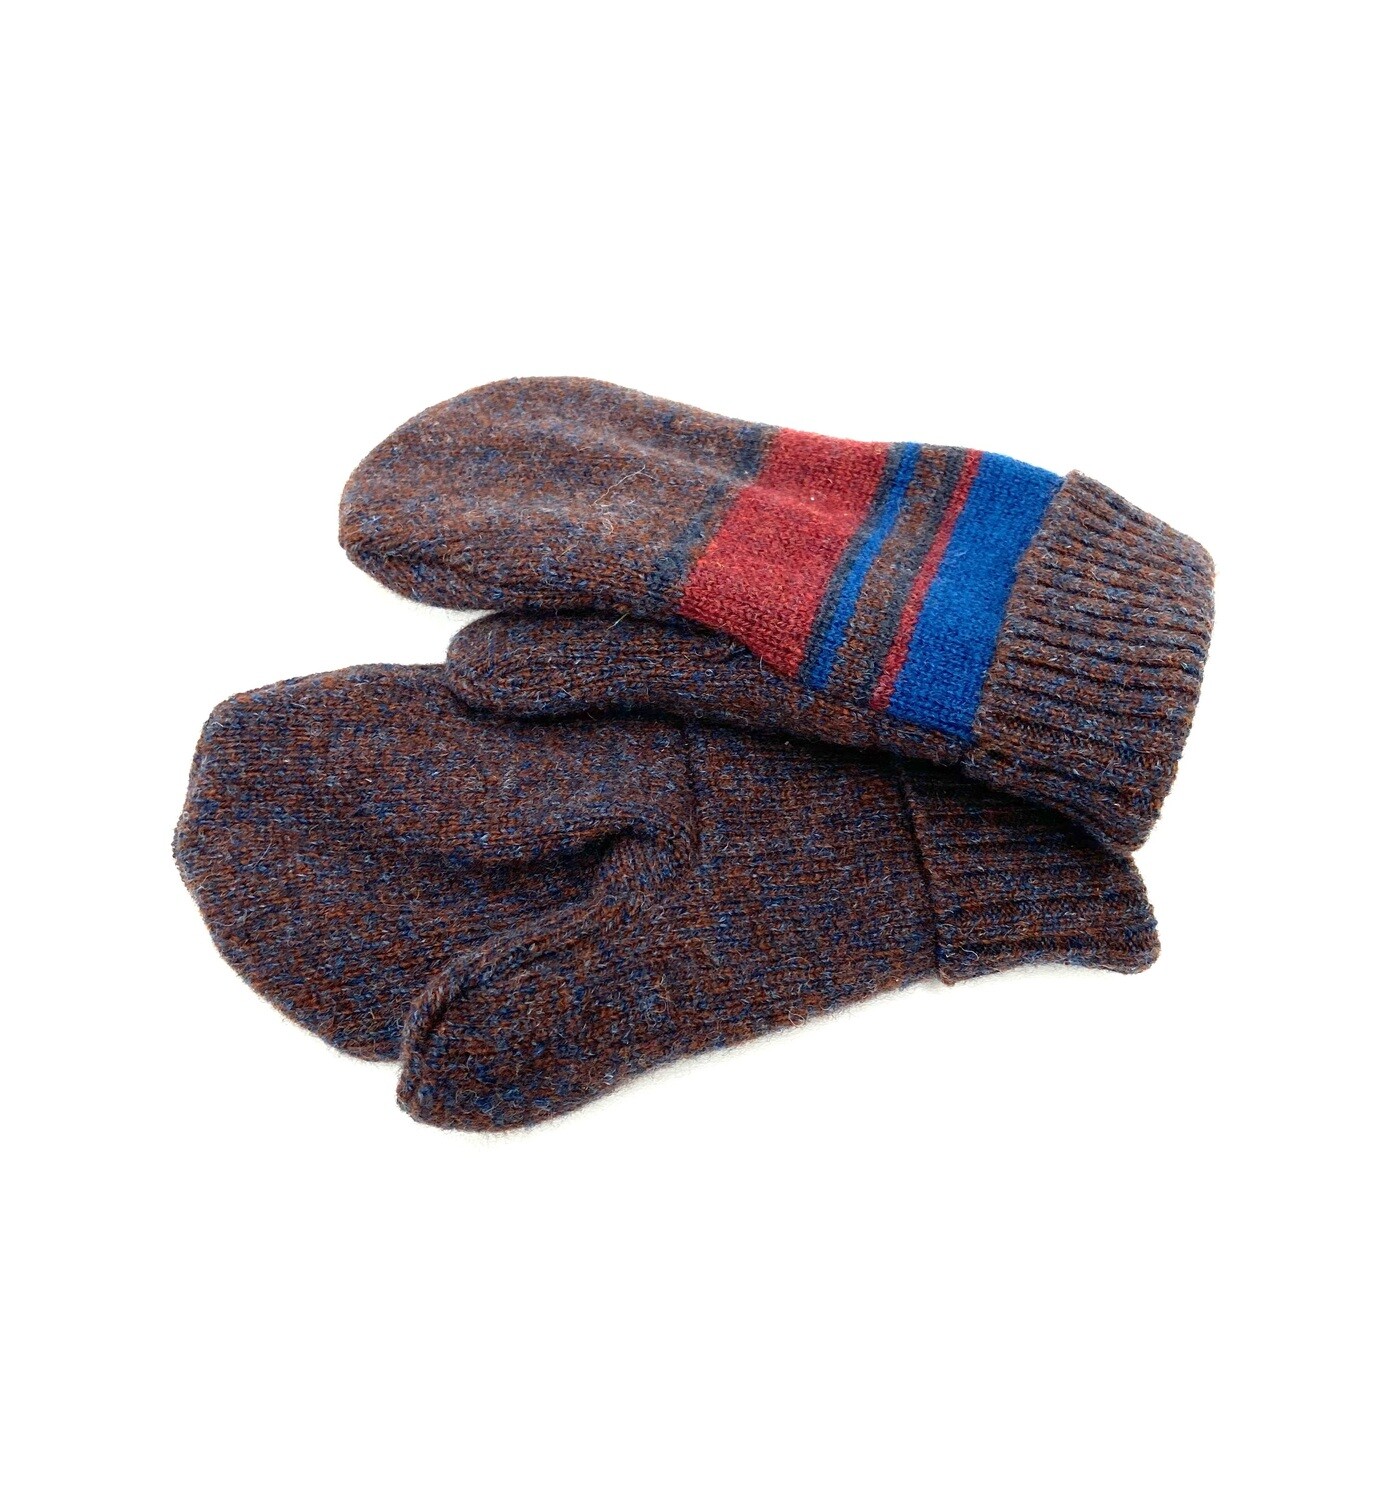 Small Multicoloured Blue and Red- Mary's Mittens